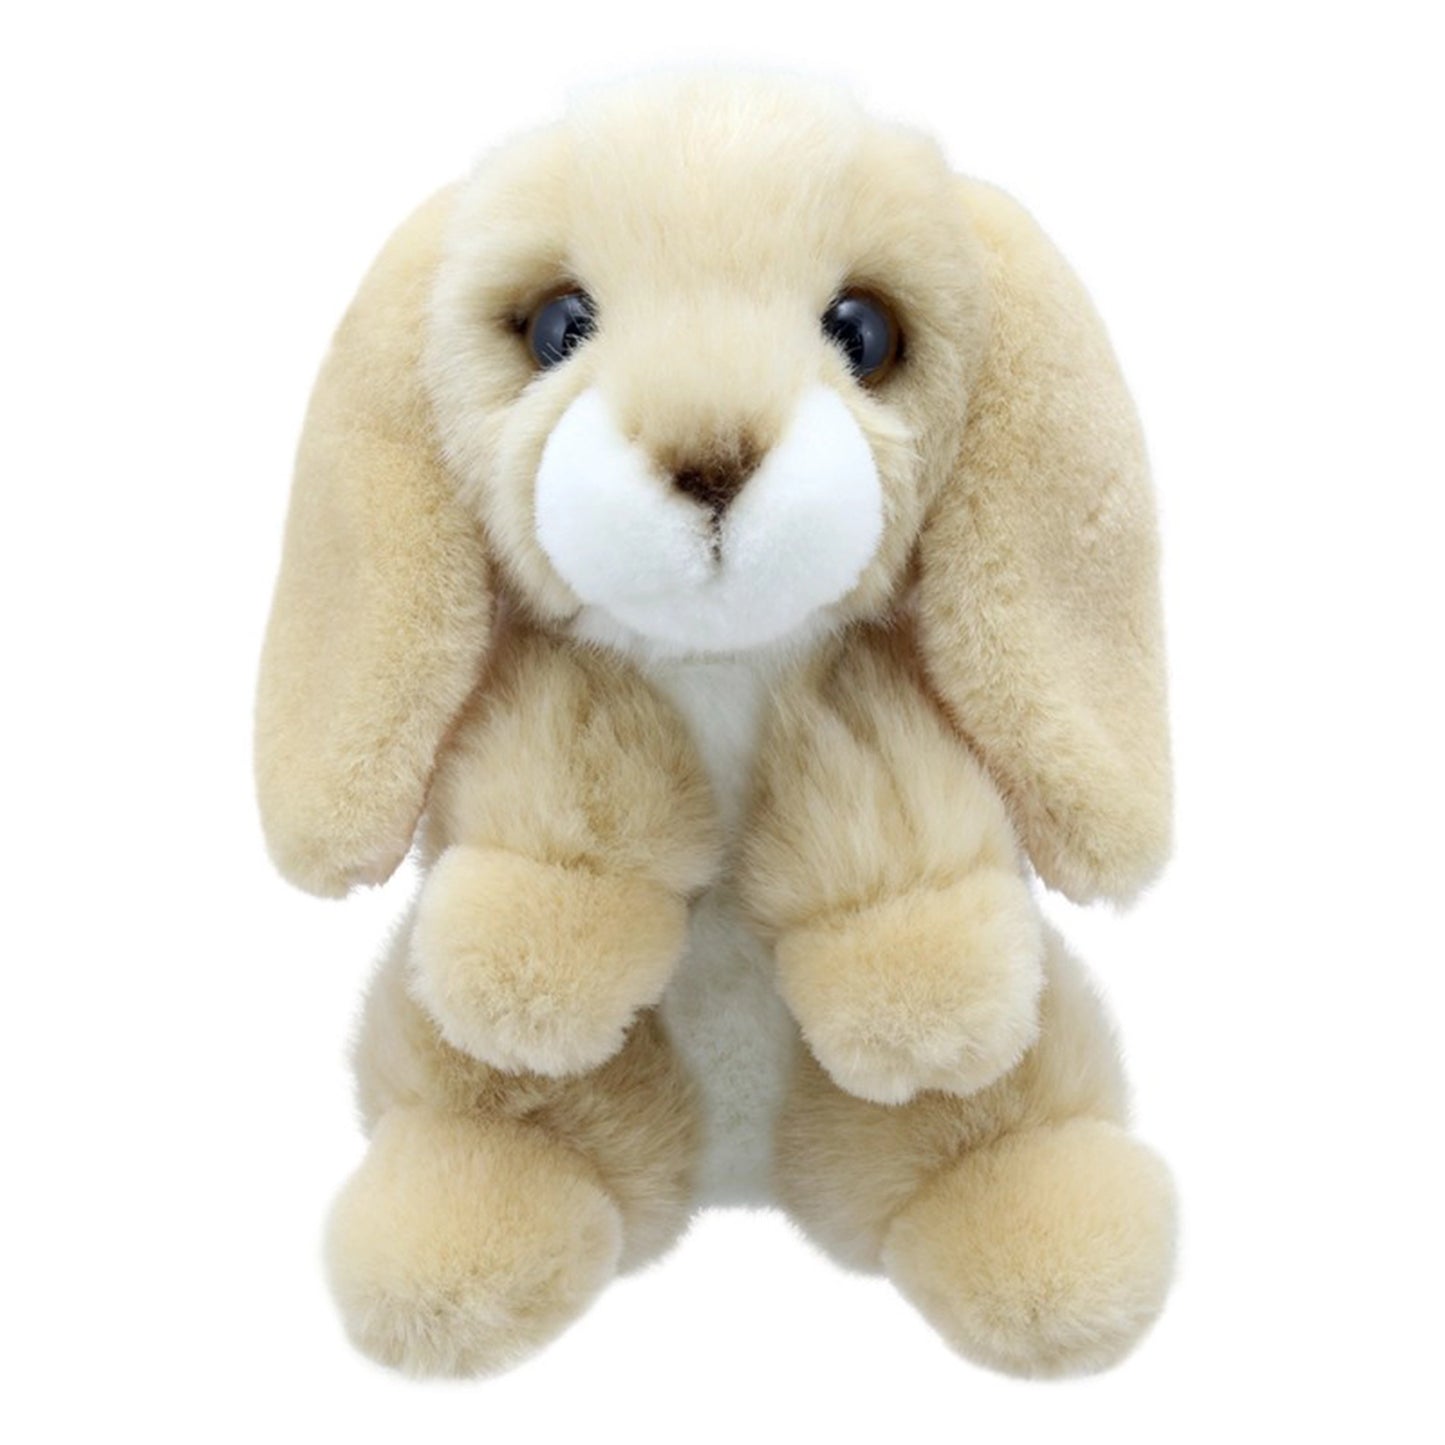 Wilberry Mini's Rabbit (Lop-Eared) - Wilberry Toys - The Forgotten Toy Shop